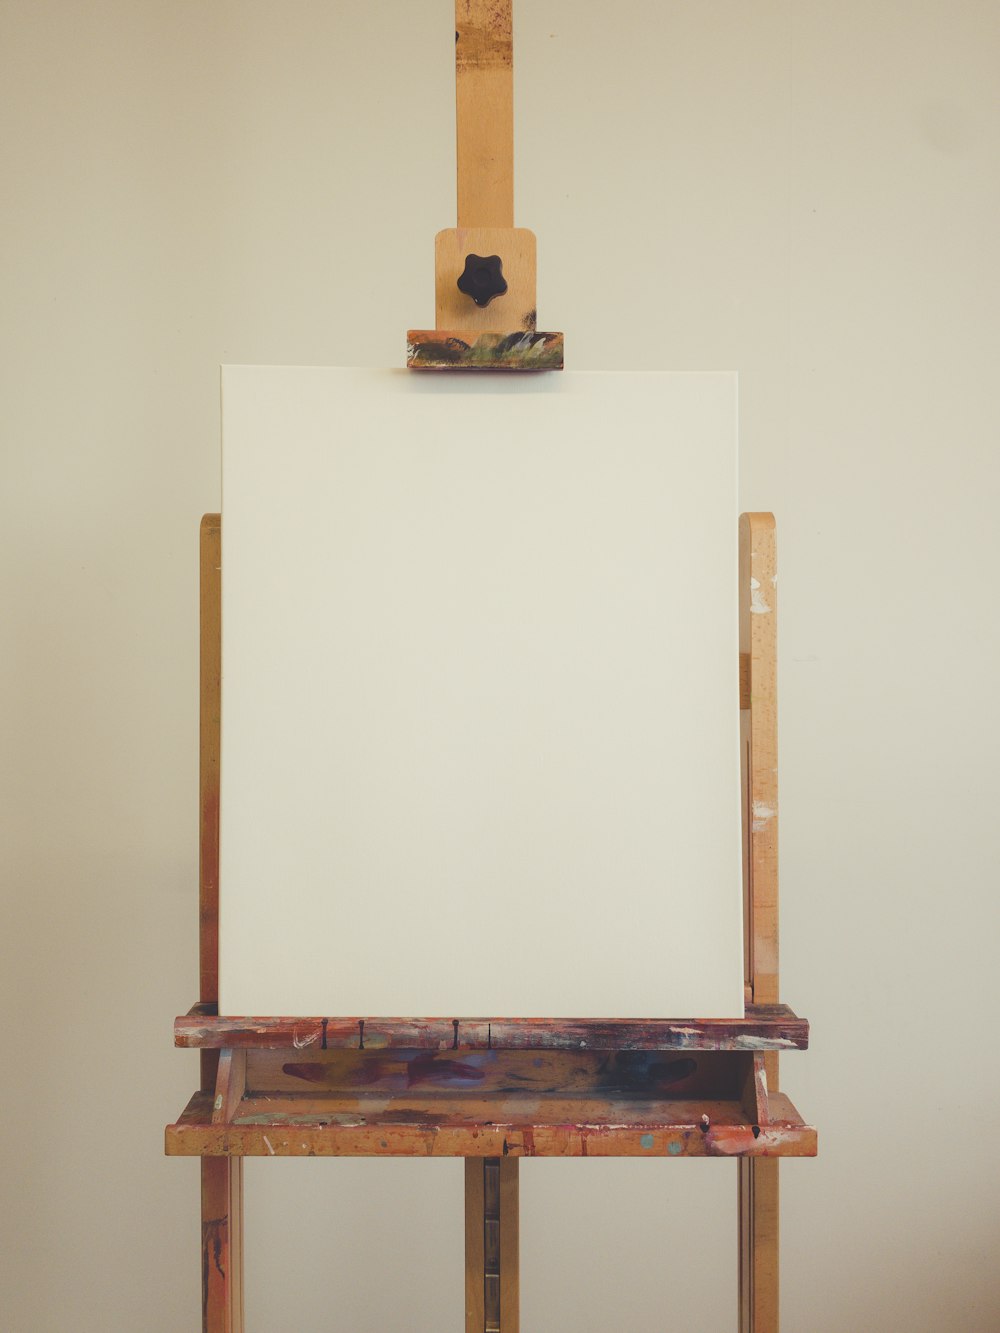 Blank White Art Canvas Stand On Black Wooden Easel Mockup Stock Photo -  Download Image Now - iStock